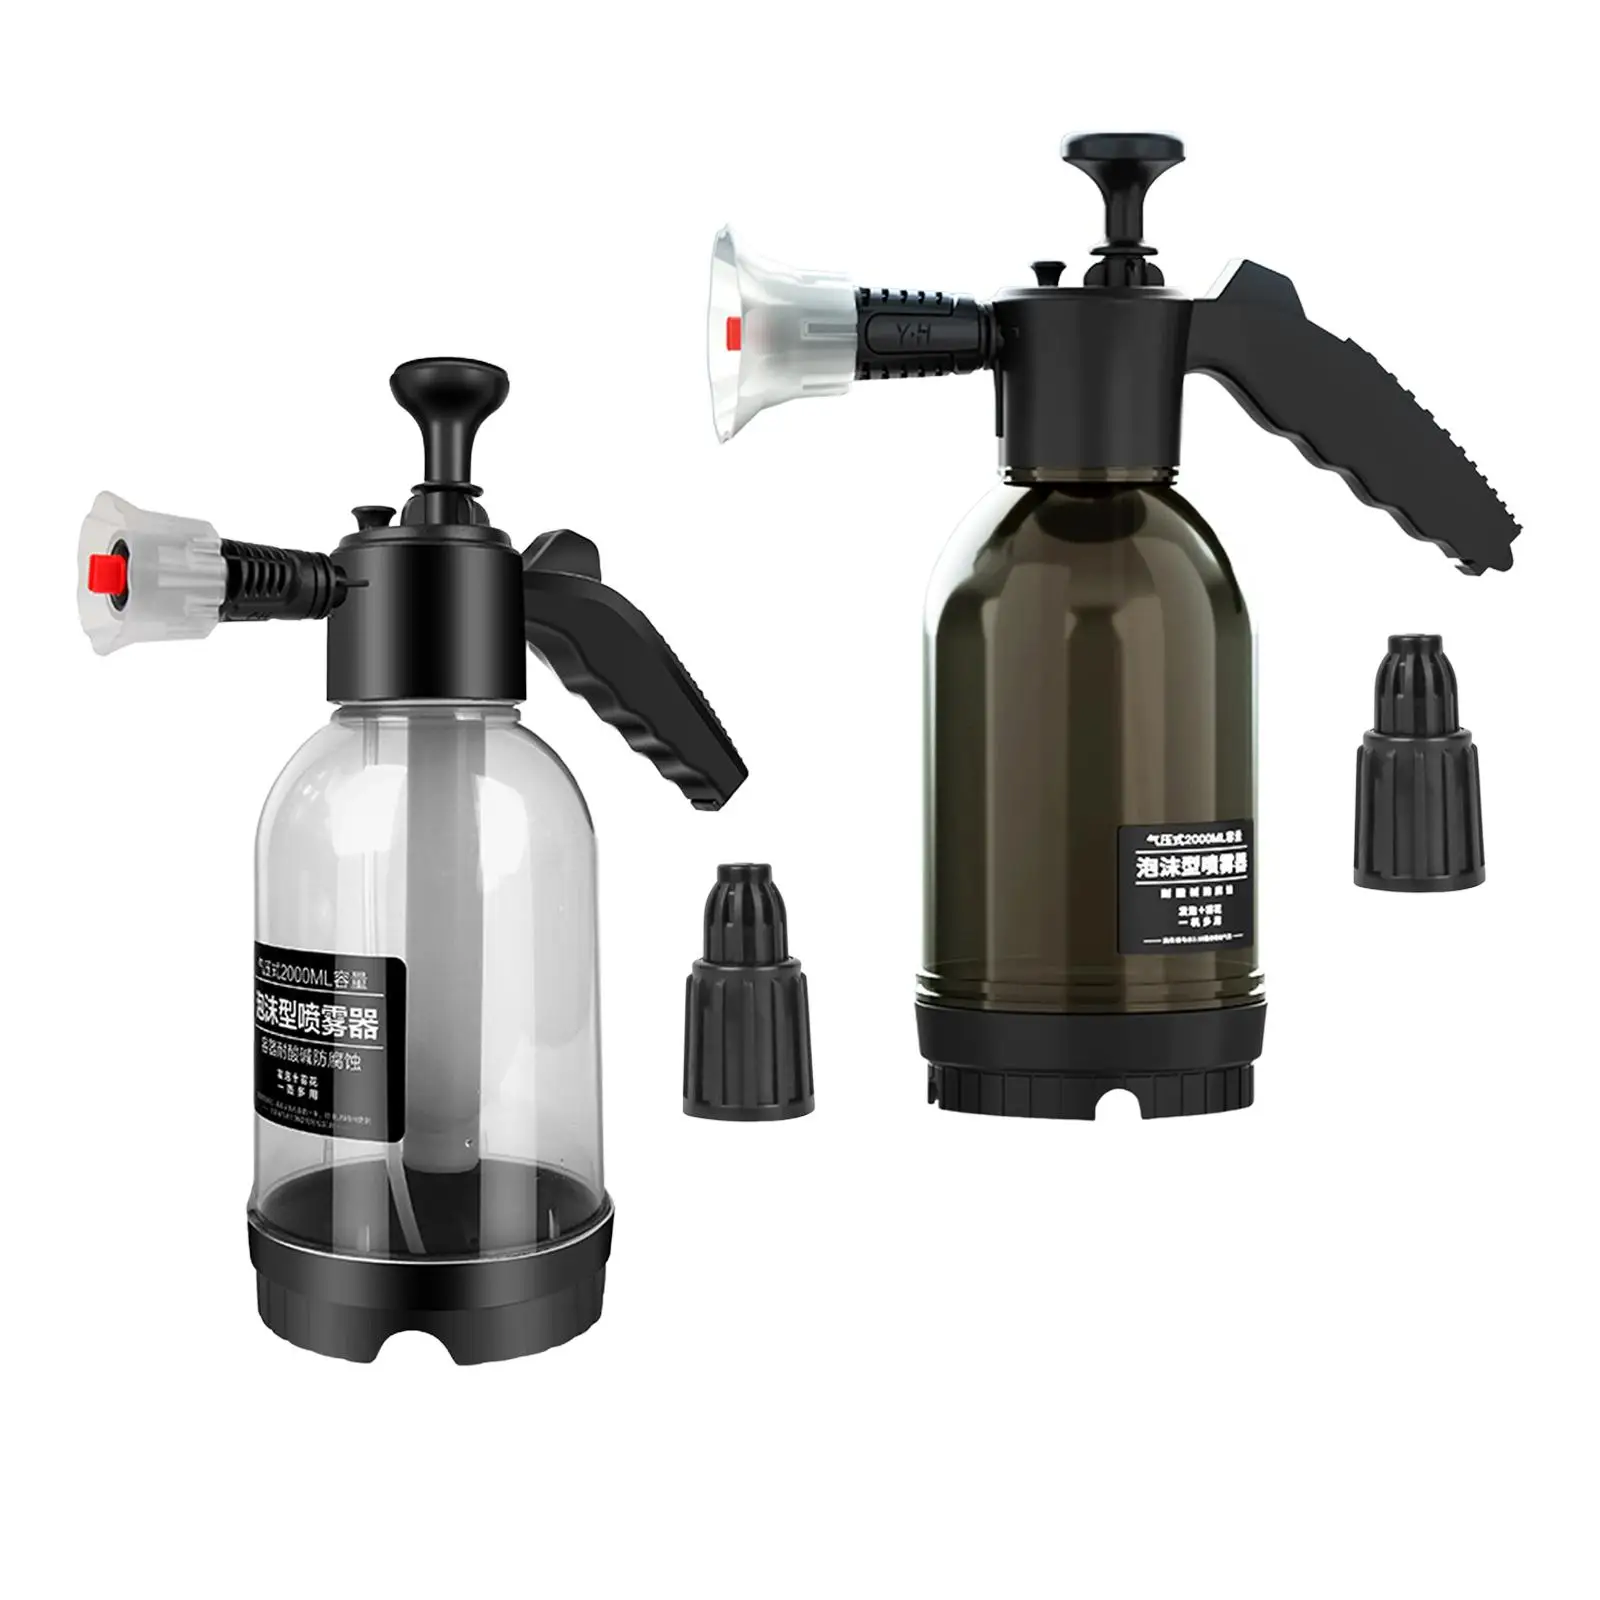 car wash Foam Sprayer 2L Multifunction Watering can Cleaning Equipment for Outdoor Garden Automotive Detailing Home